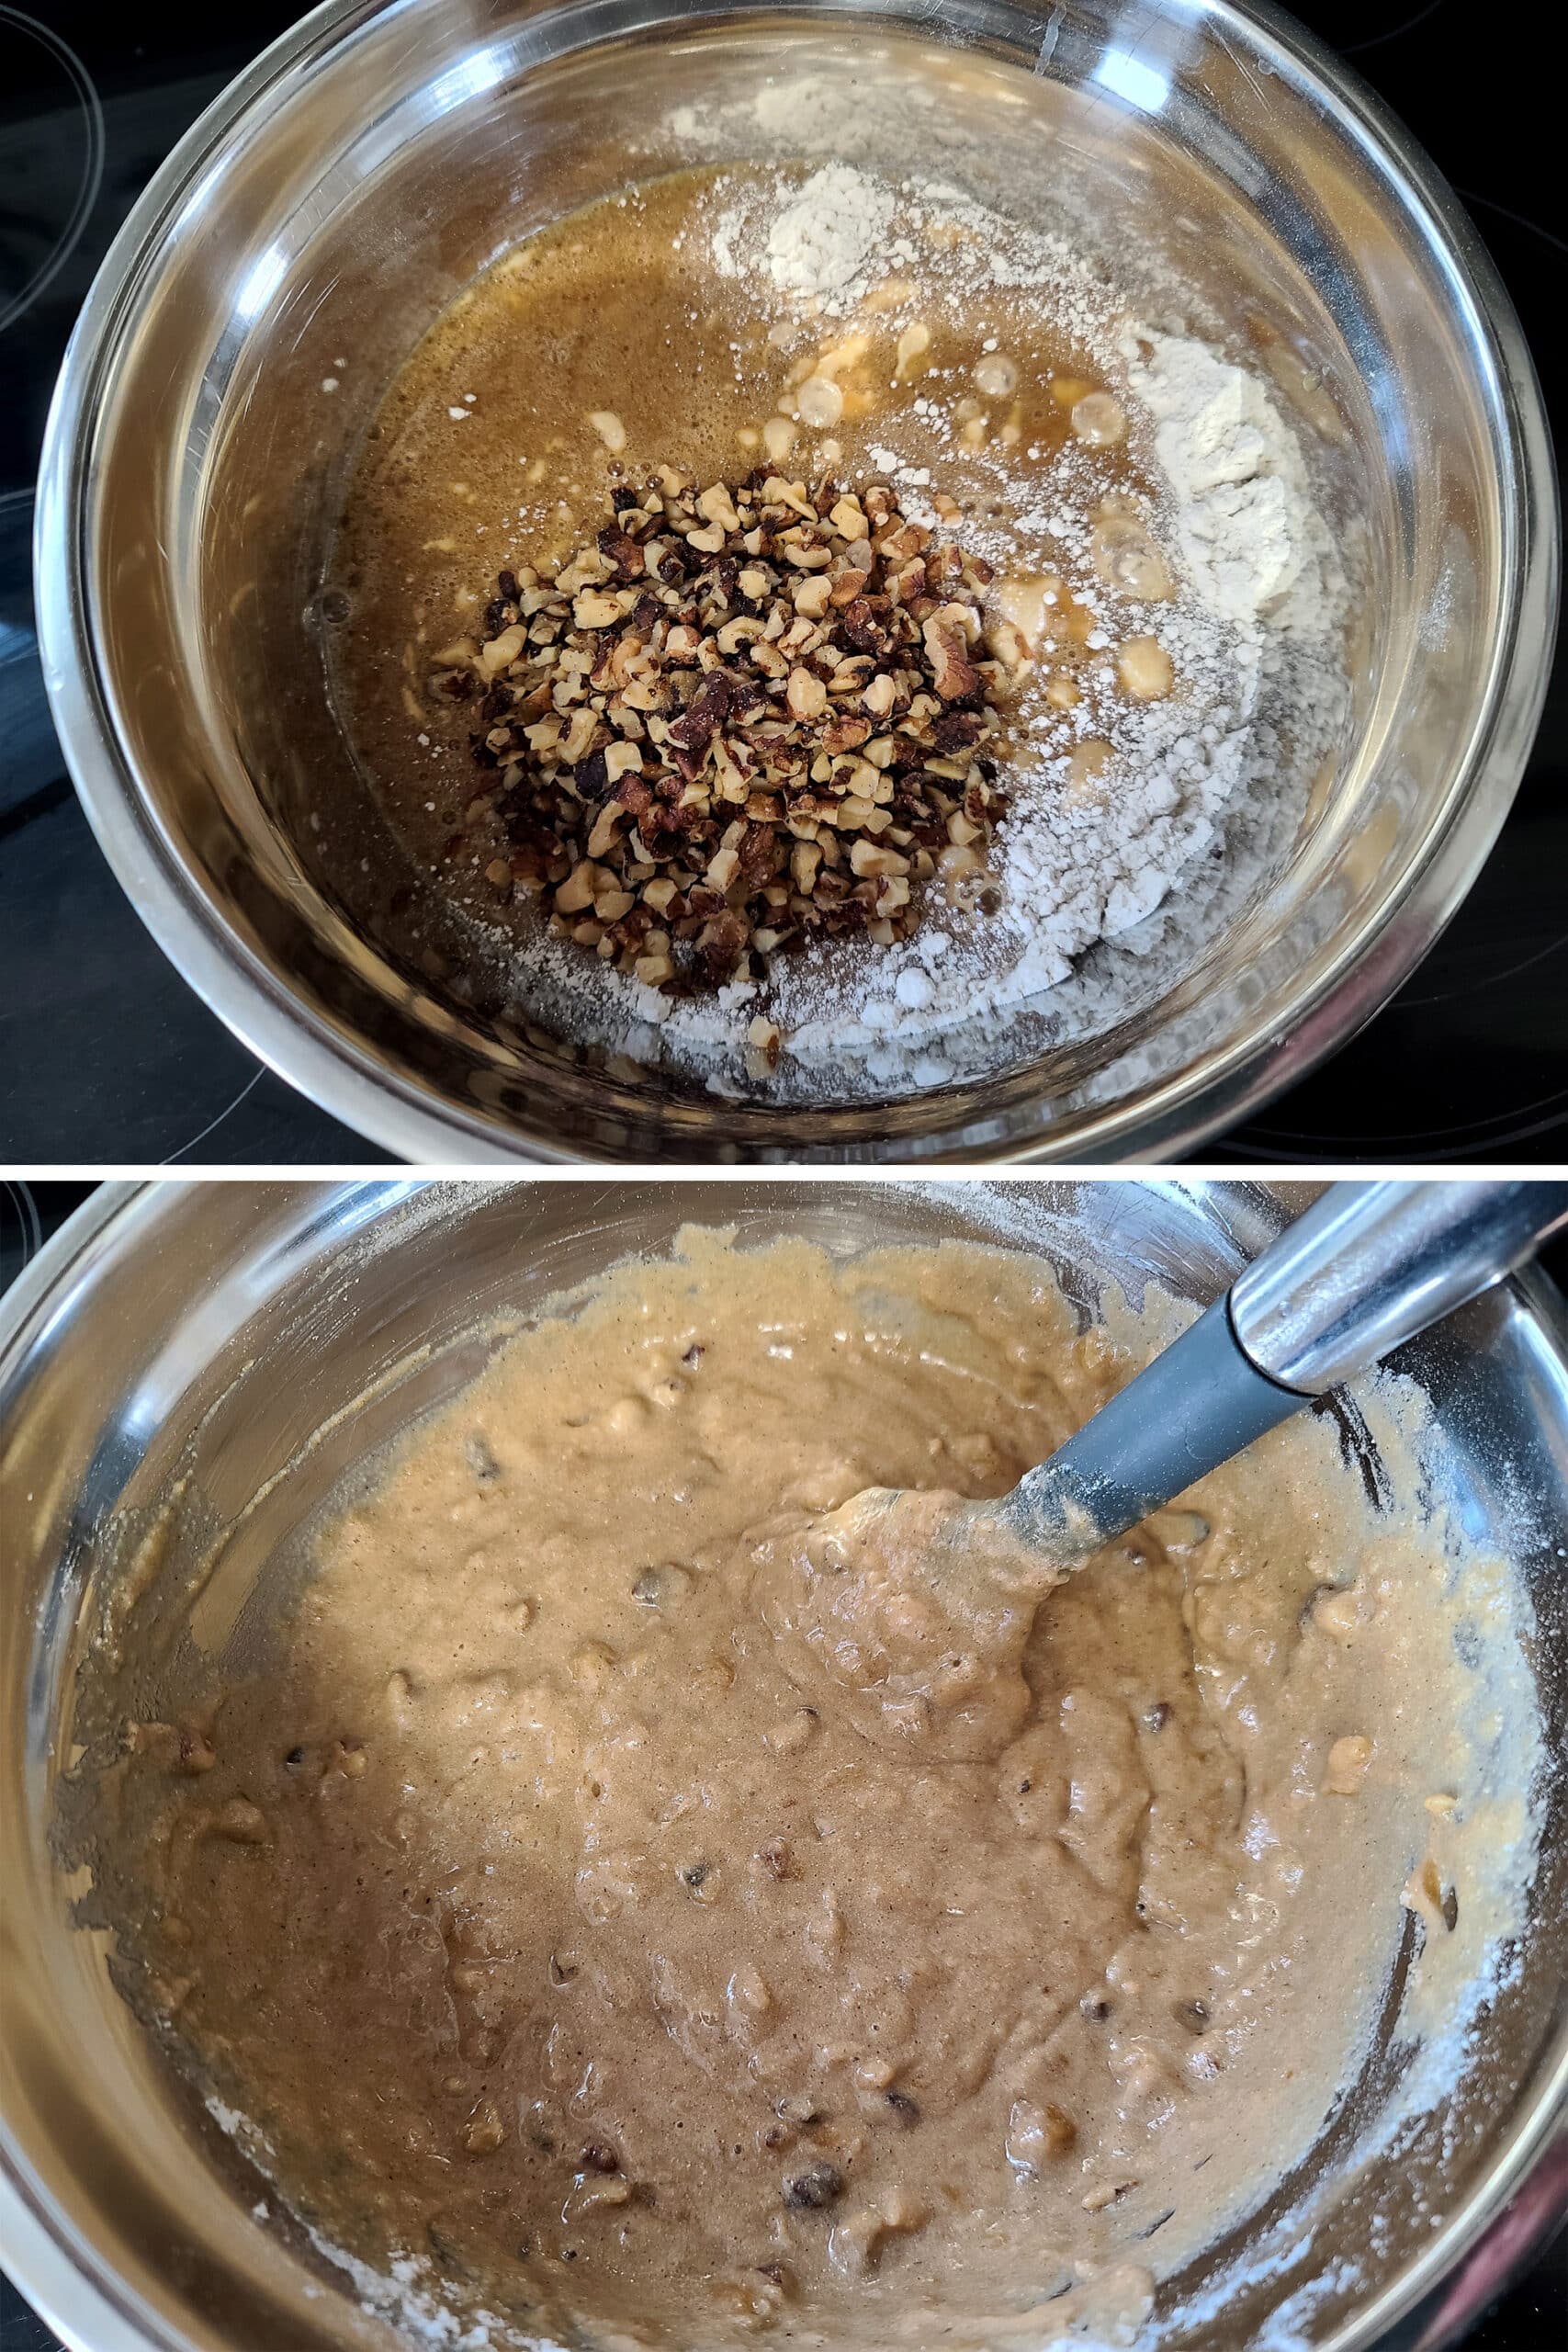 A 2 part image showing the wet ingredients, dry ingredients, and walnuts being mixed together.